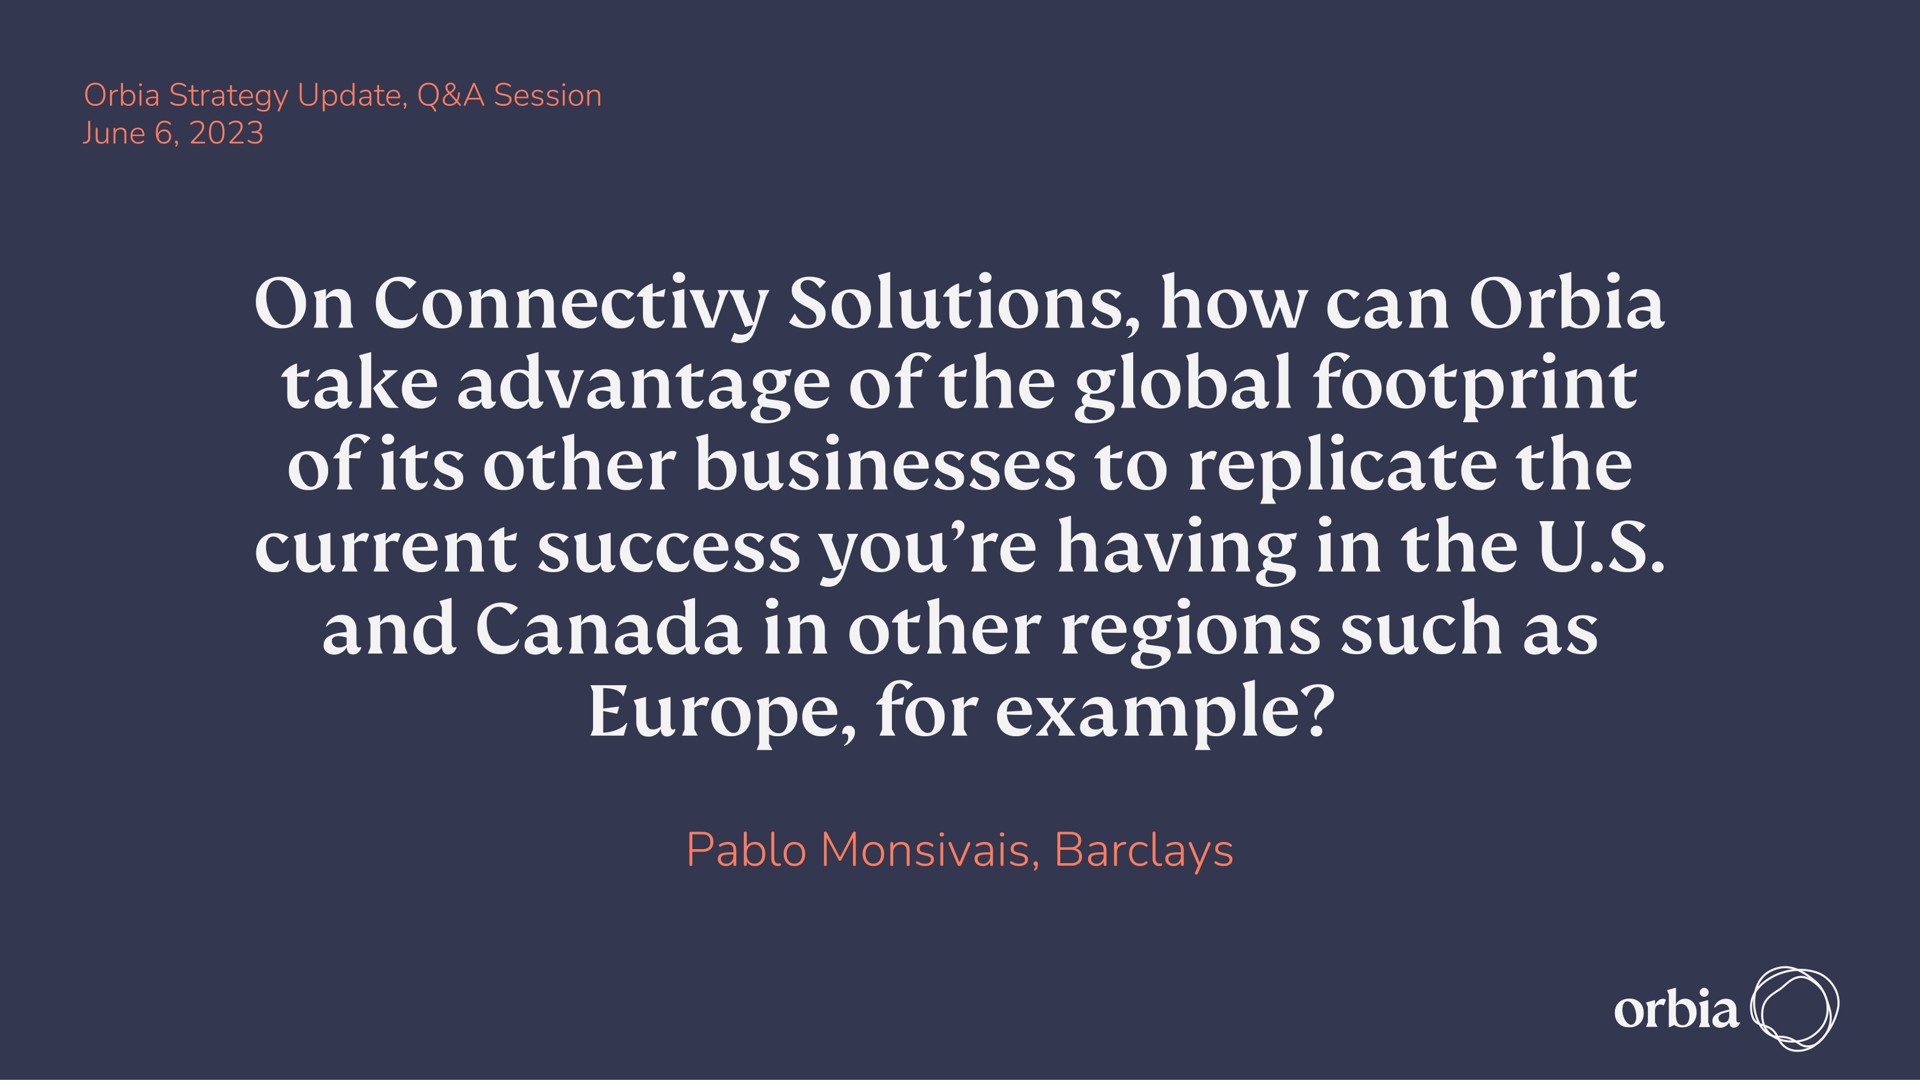 on solutions how can take advantage of the global footprint of its other businesses to replicate the current success you having in the and canada in other regions such as for example pablo rede | Orbia